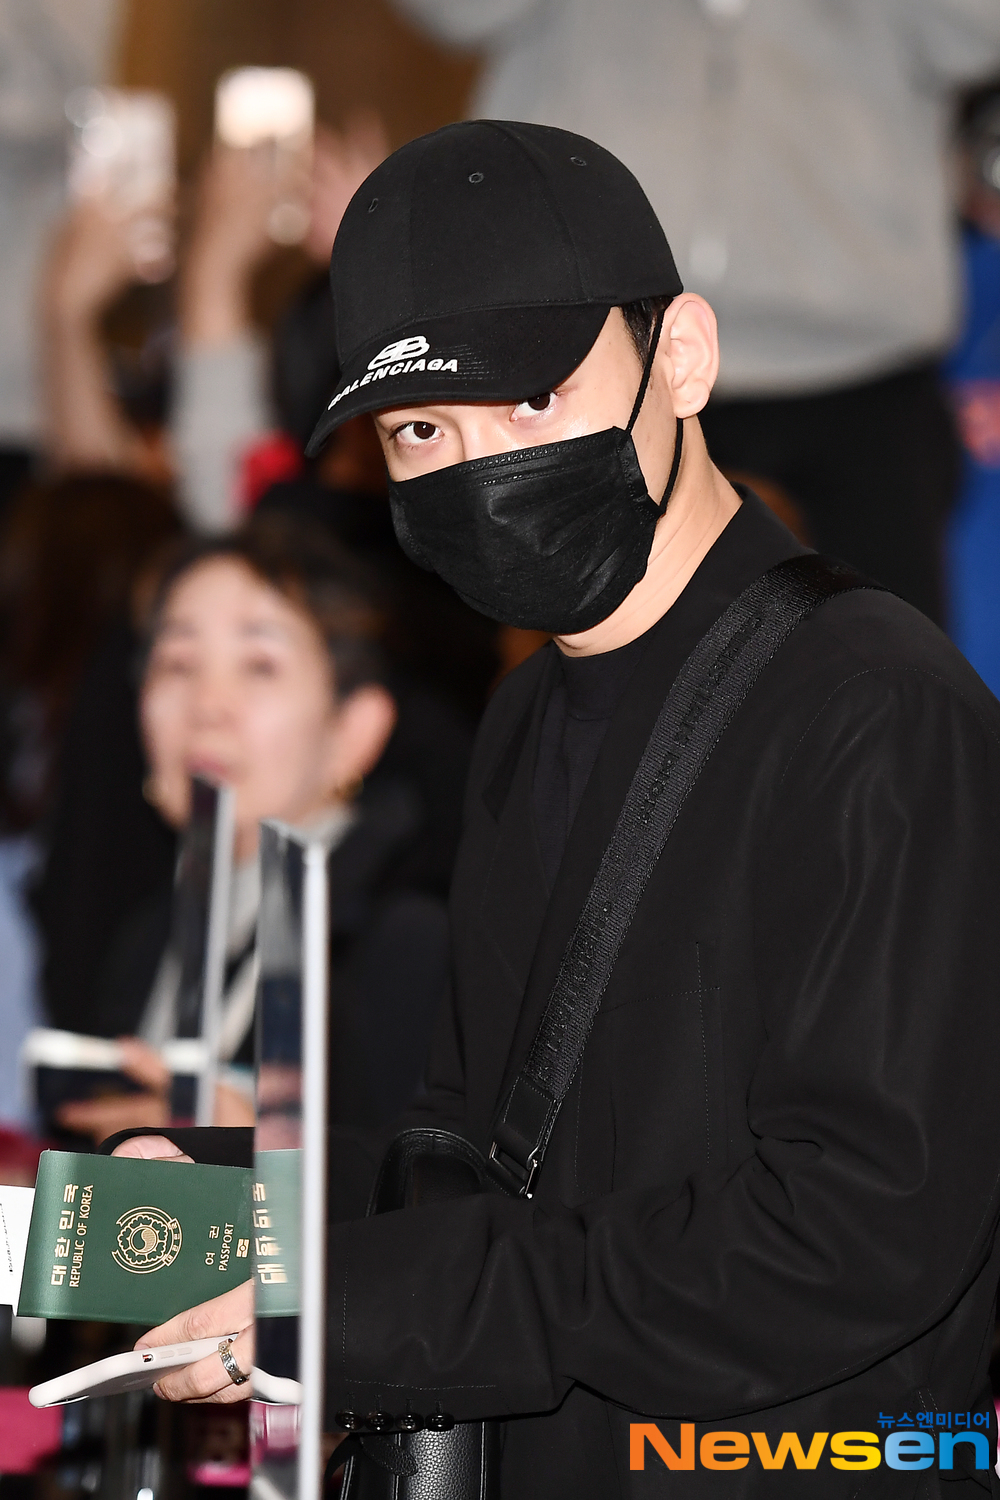 <p>EXO(EXO) member, guardian, Chanyeol, Kai, background, Sehun, Chen, this 10 17, PM Seoul Gangseo way car Gimpo International Airport through the ‘EXO PLANET #5 - EXplOration - In Japan’ schedule to attend car Japan Osaka University the country had.</p><p>EXO(EXO) member Chen this Japan Osaka University the country has.</p>